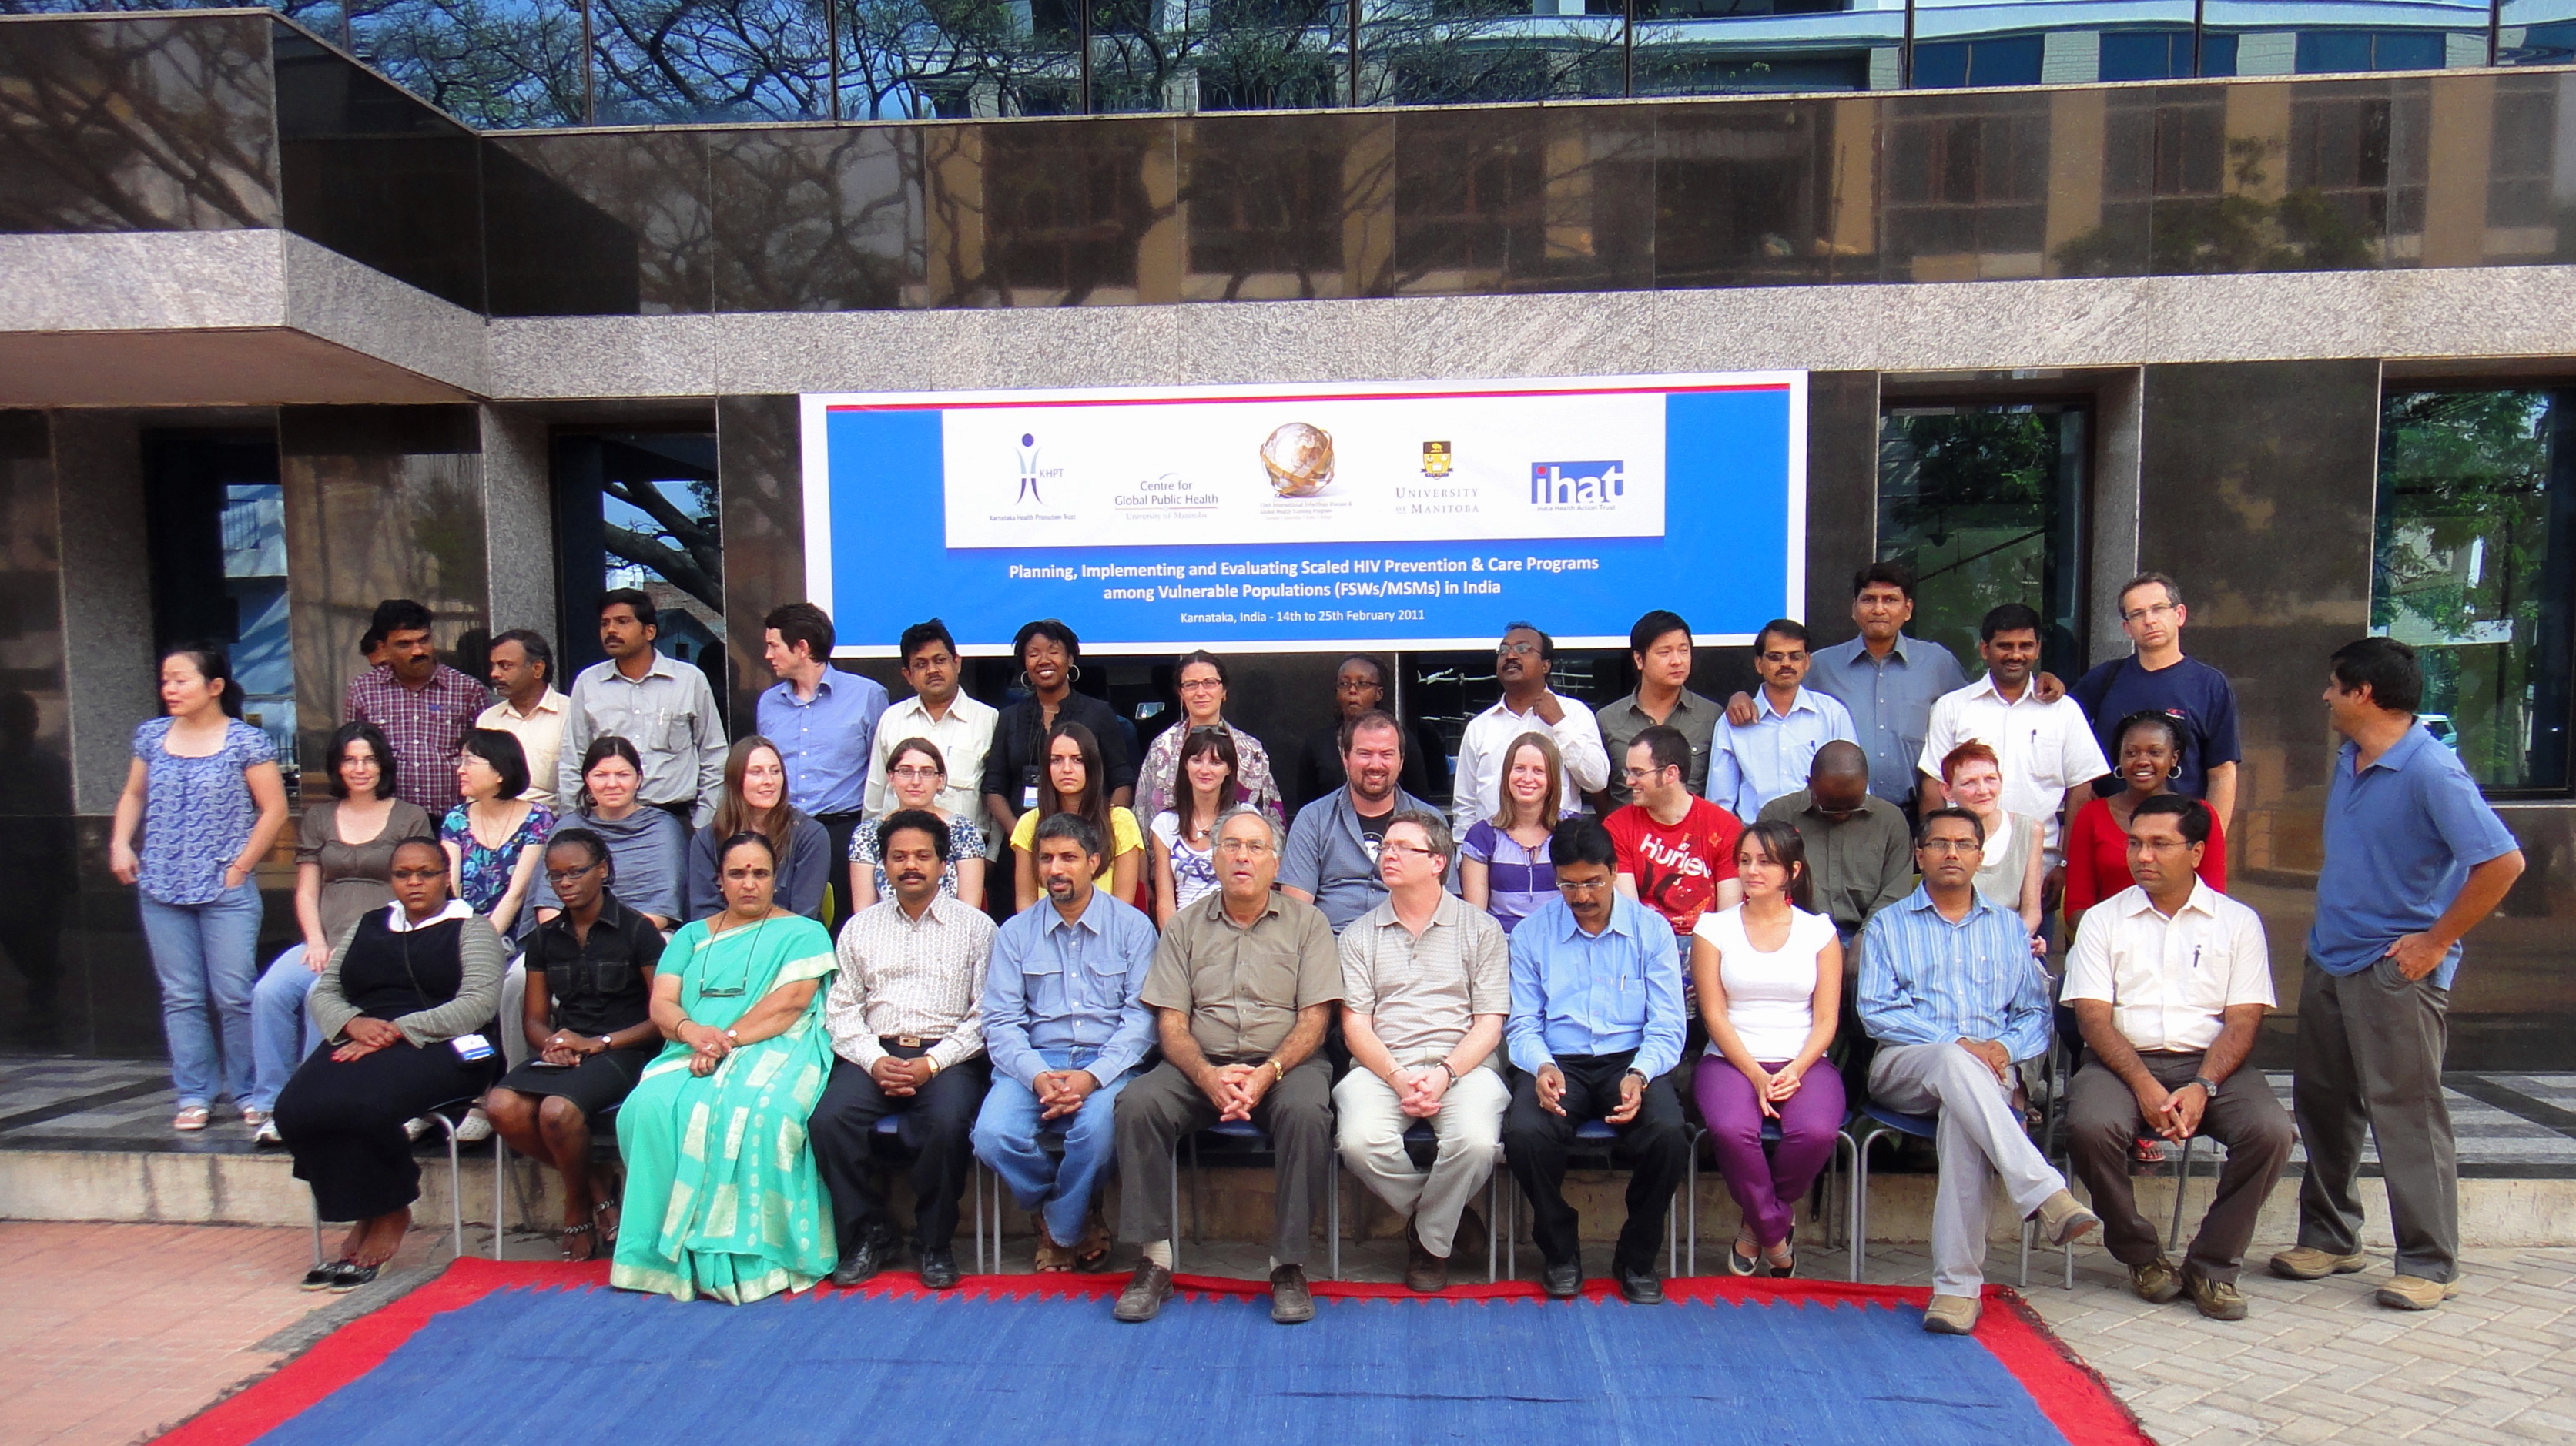 A group picture of all those attending the major course offering in Bangalore, India in February 2011.